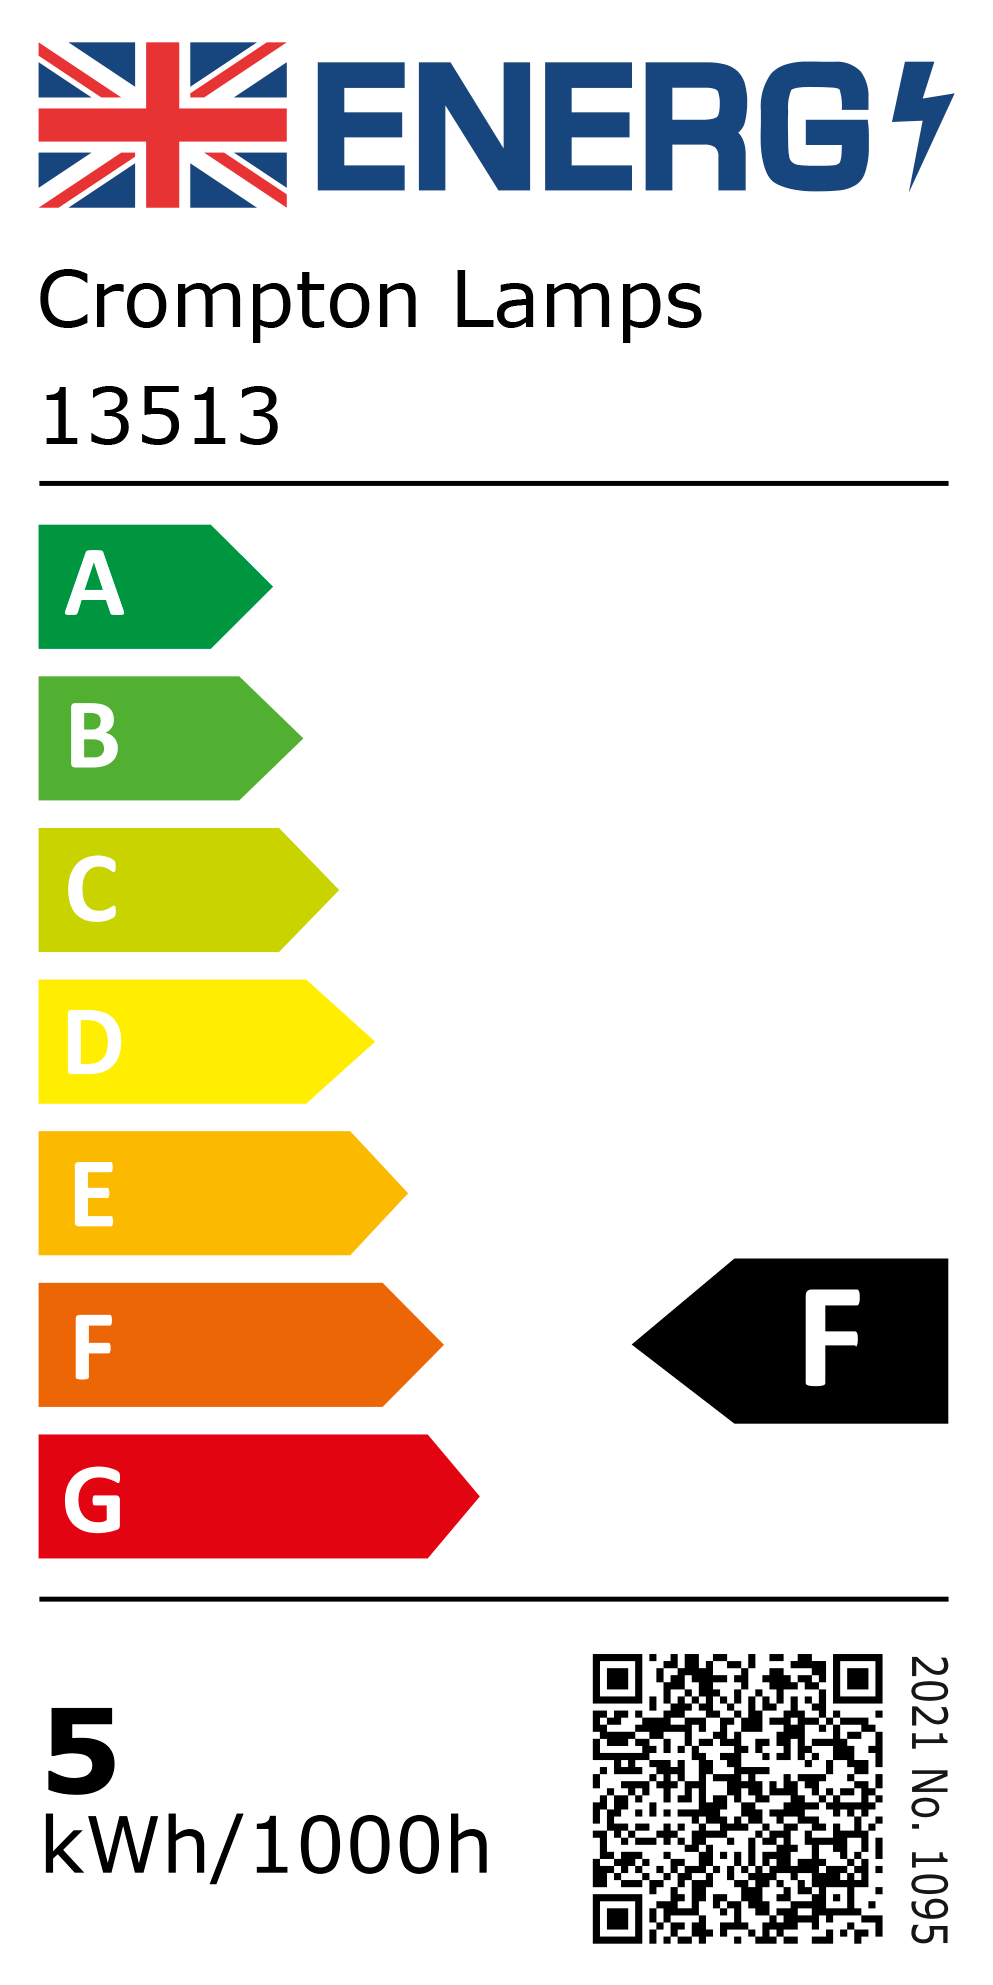 New 2021 Energy Rating Label: Stock Code 13513